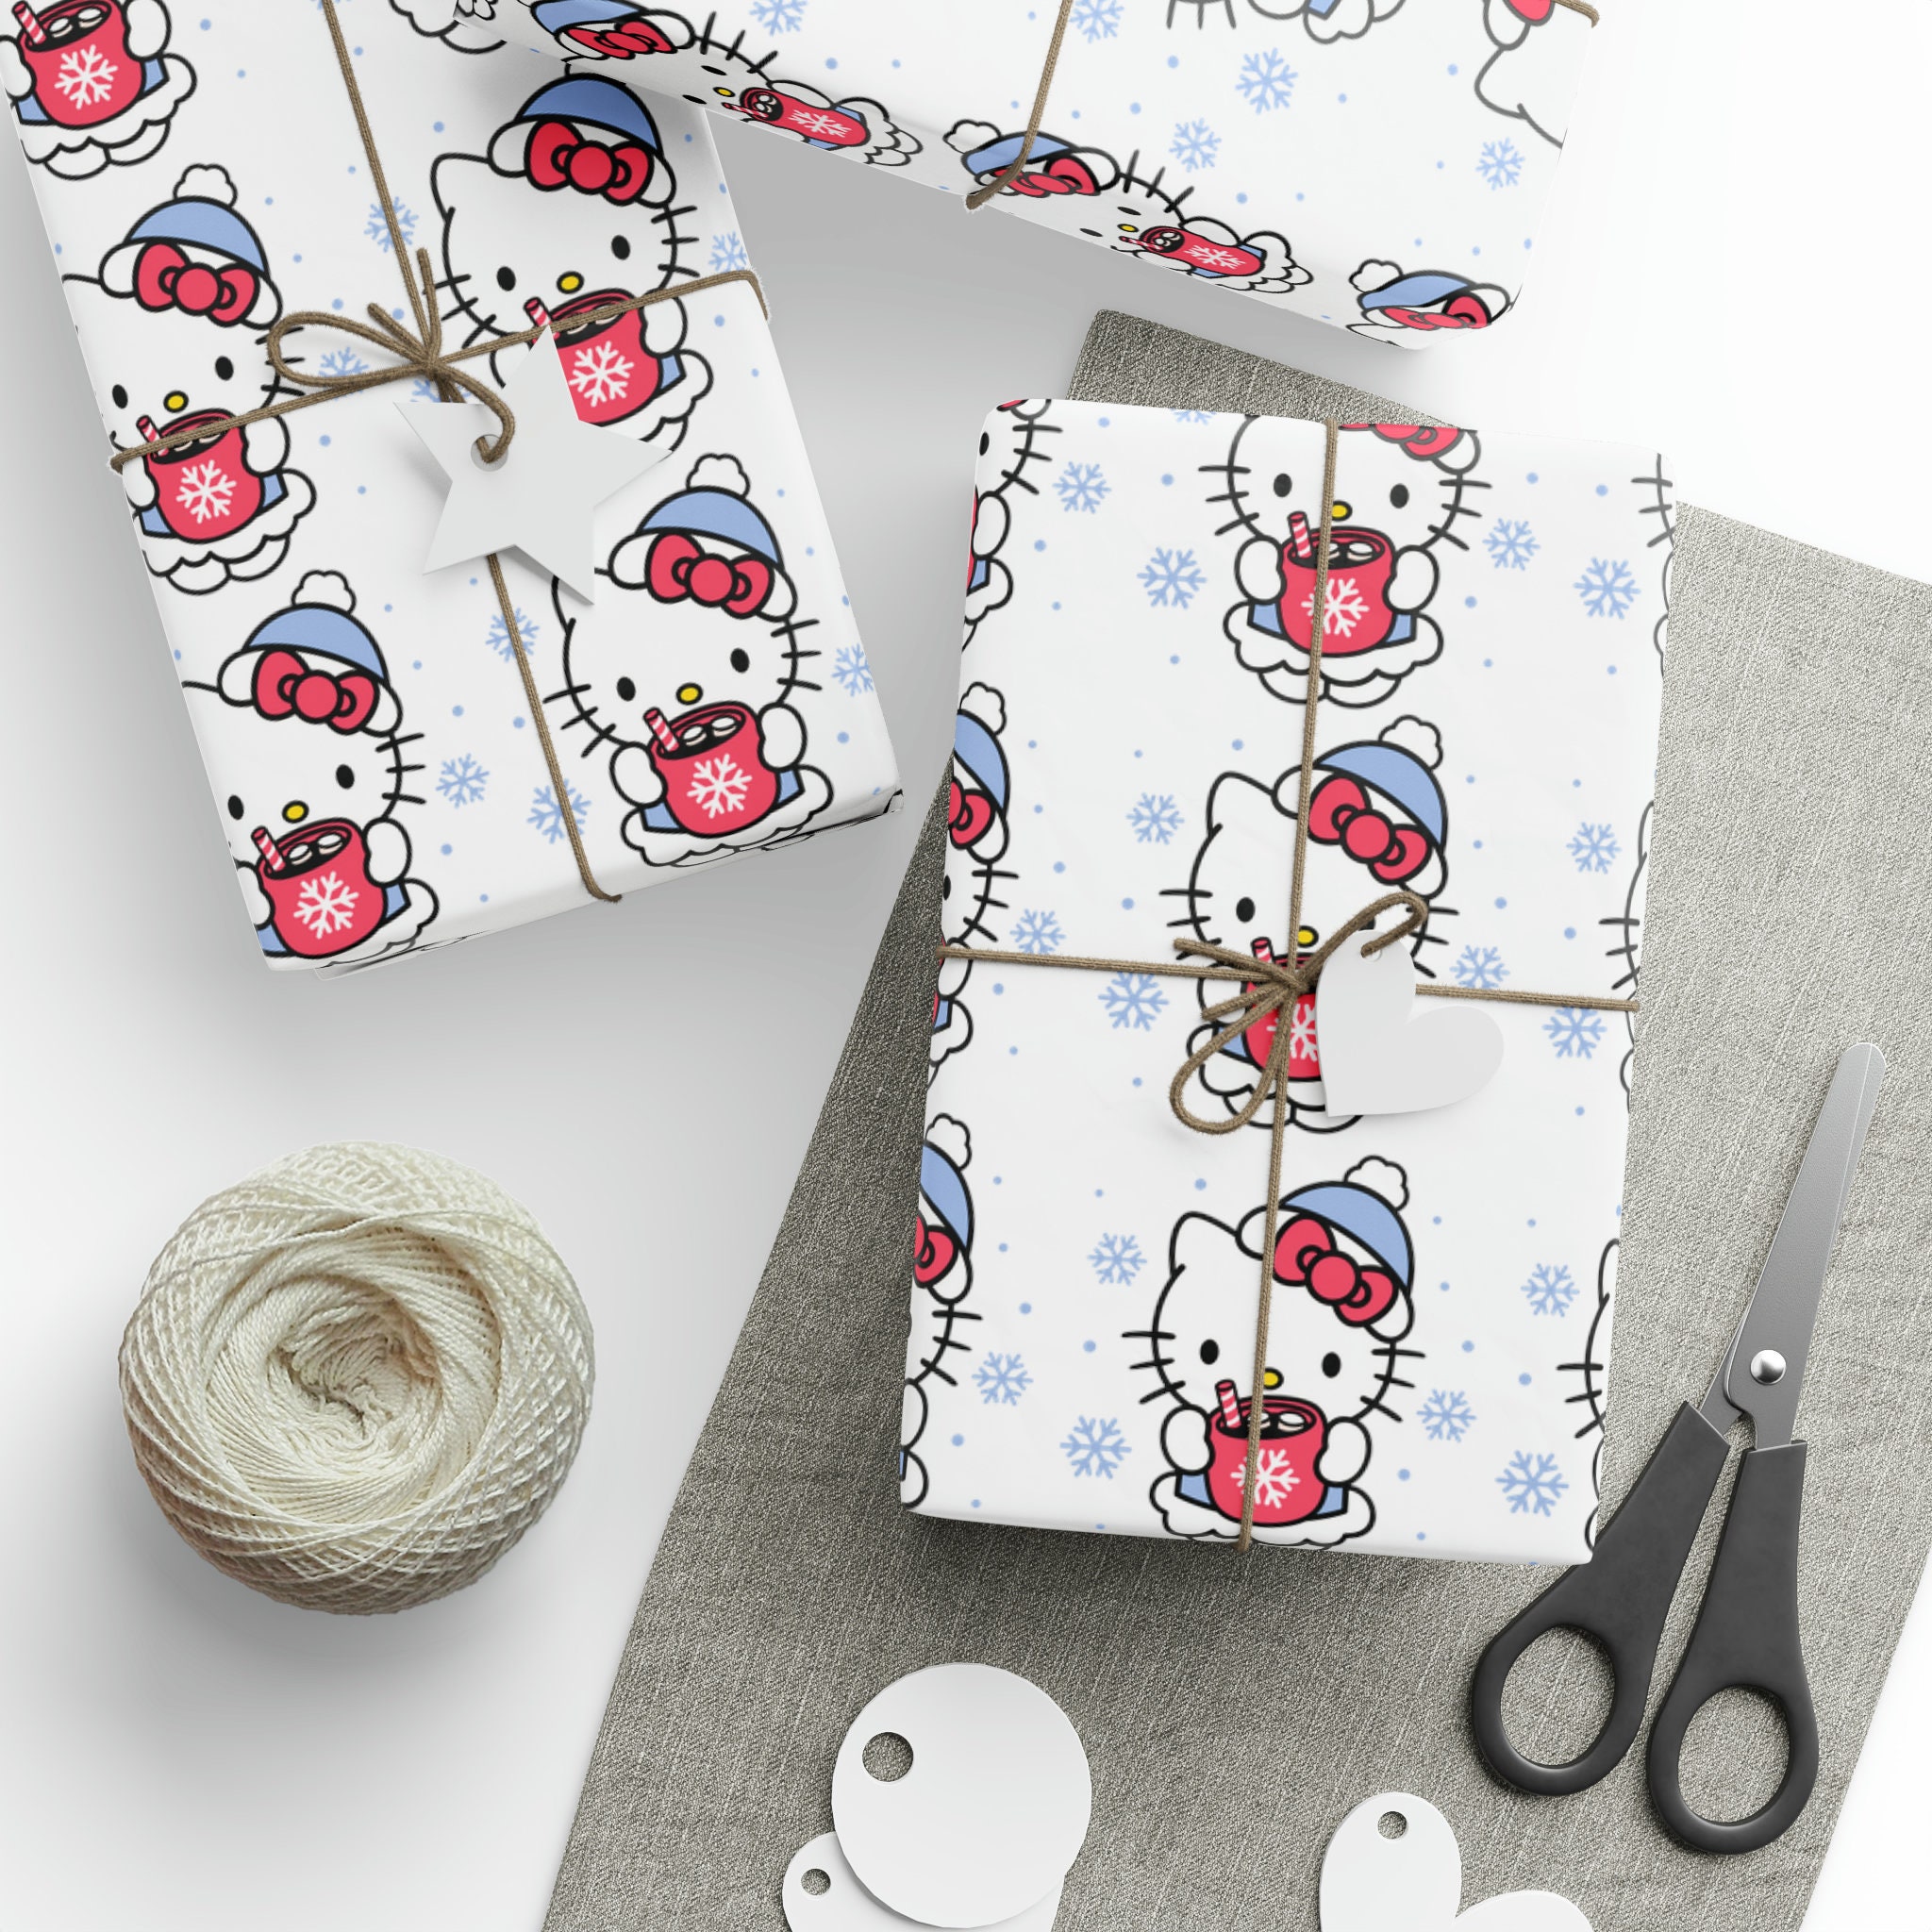 Wrapping Papers, Hello Kitty Wrapping Paper, Christmas Wrap, Gifts ...